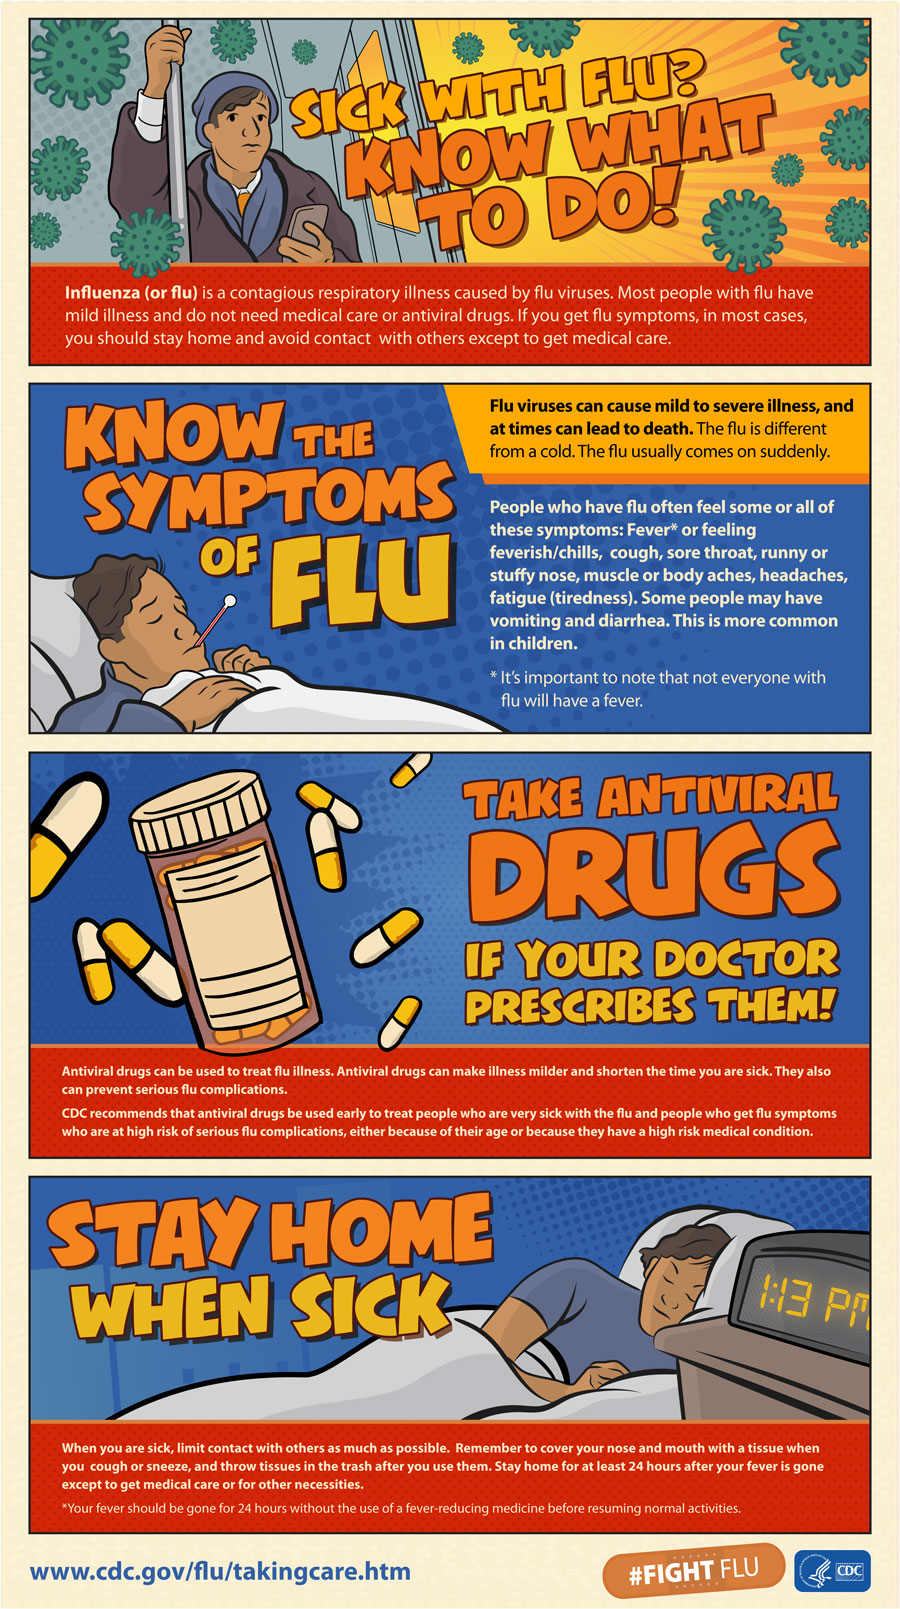 When are you no longer contagious with the flu?